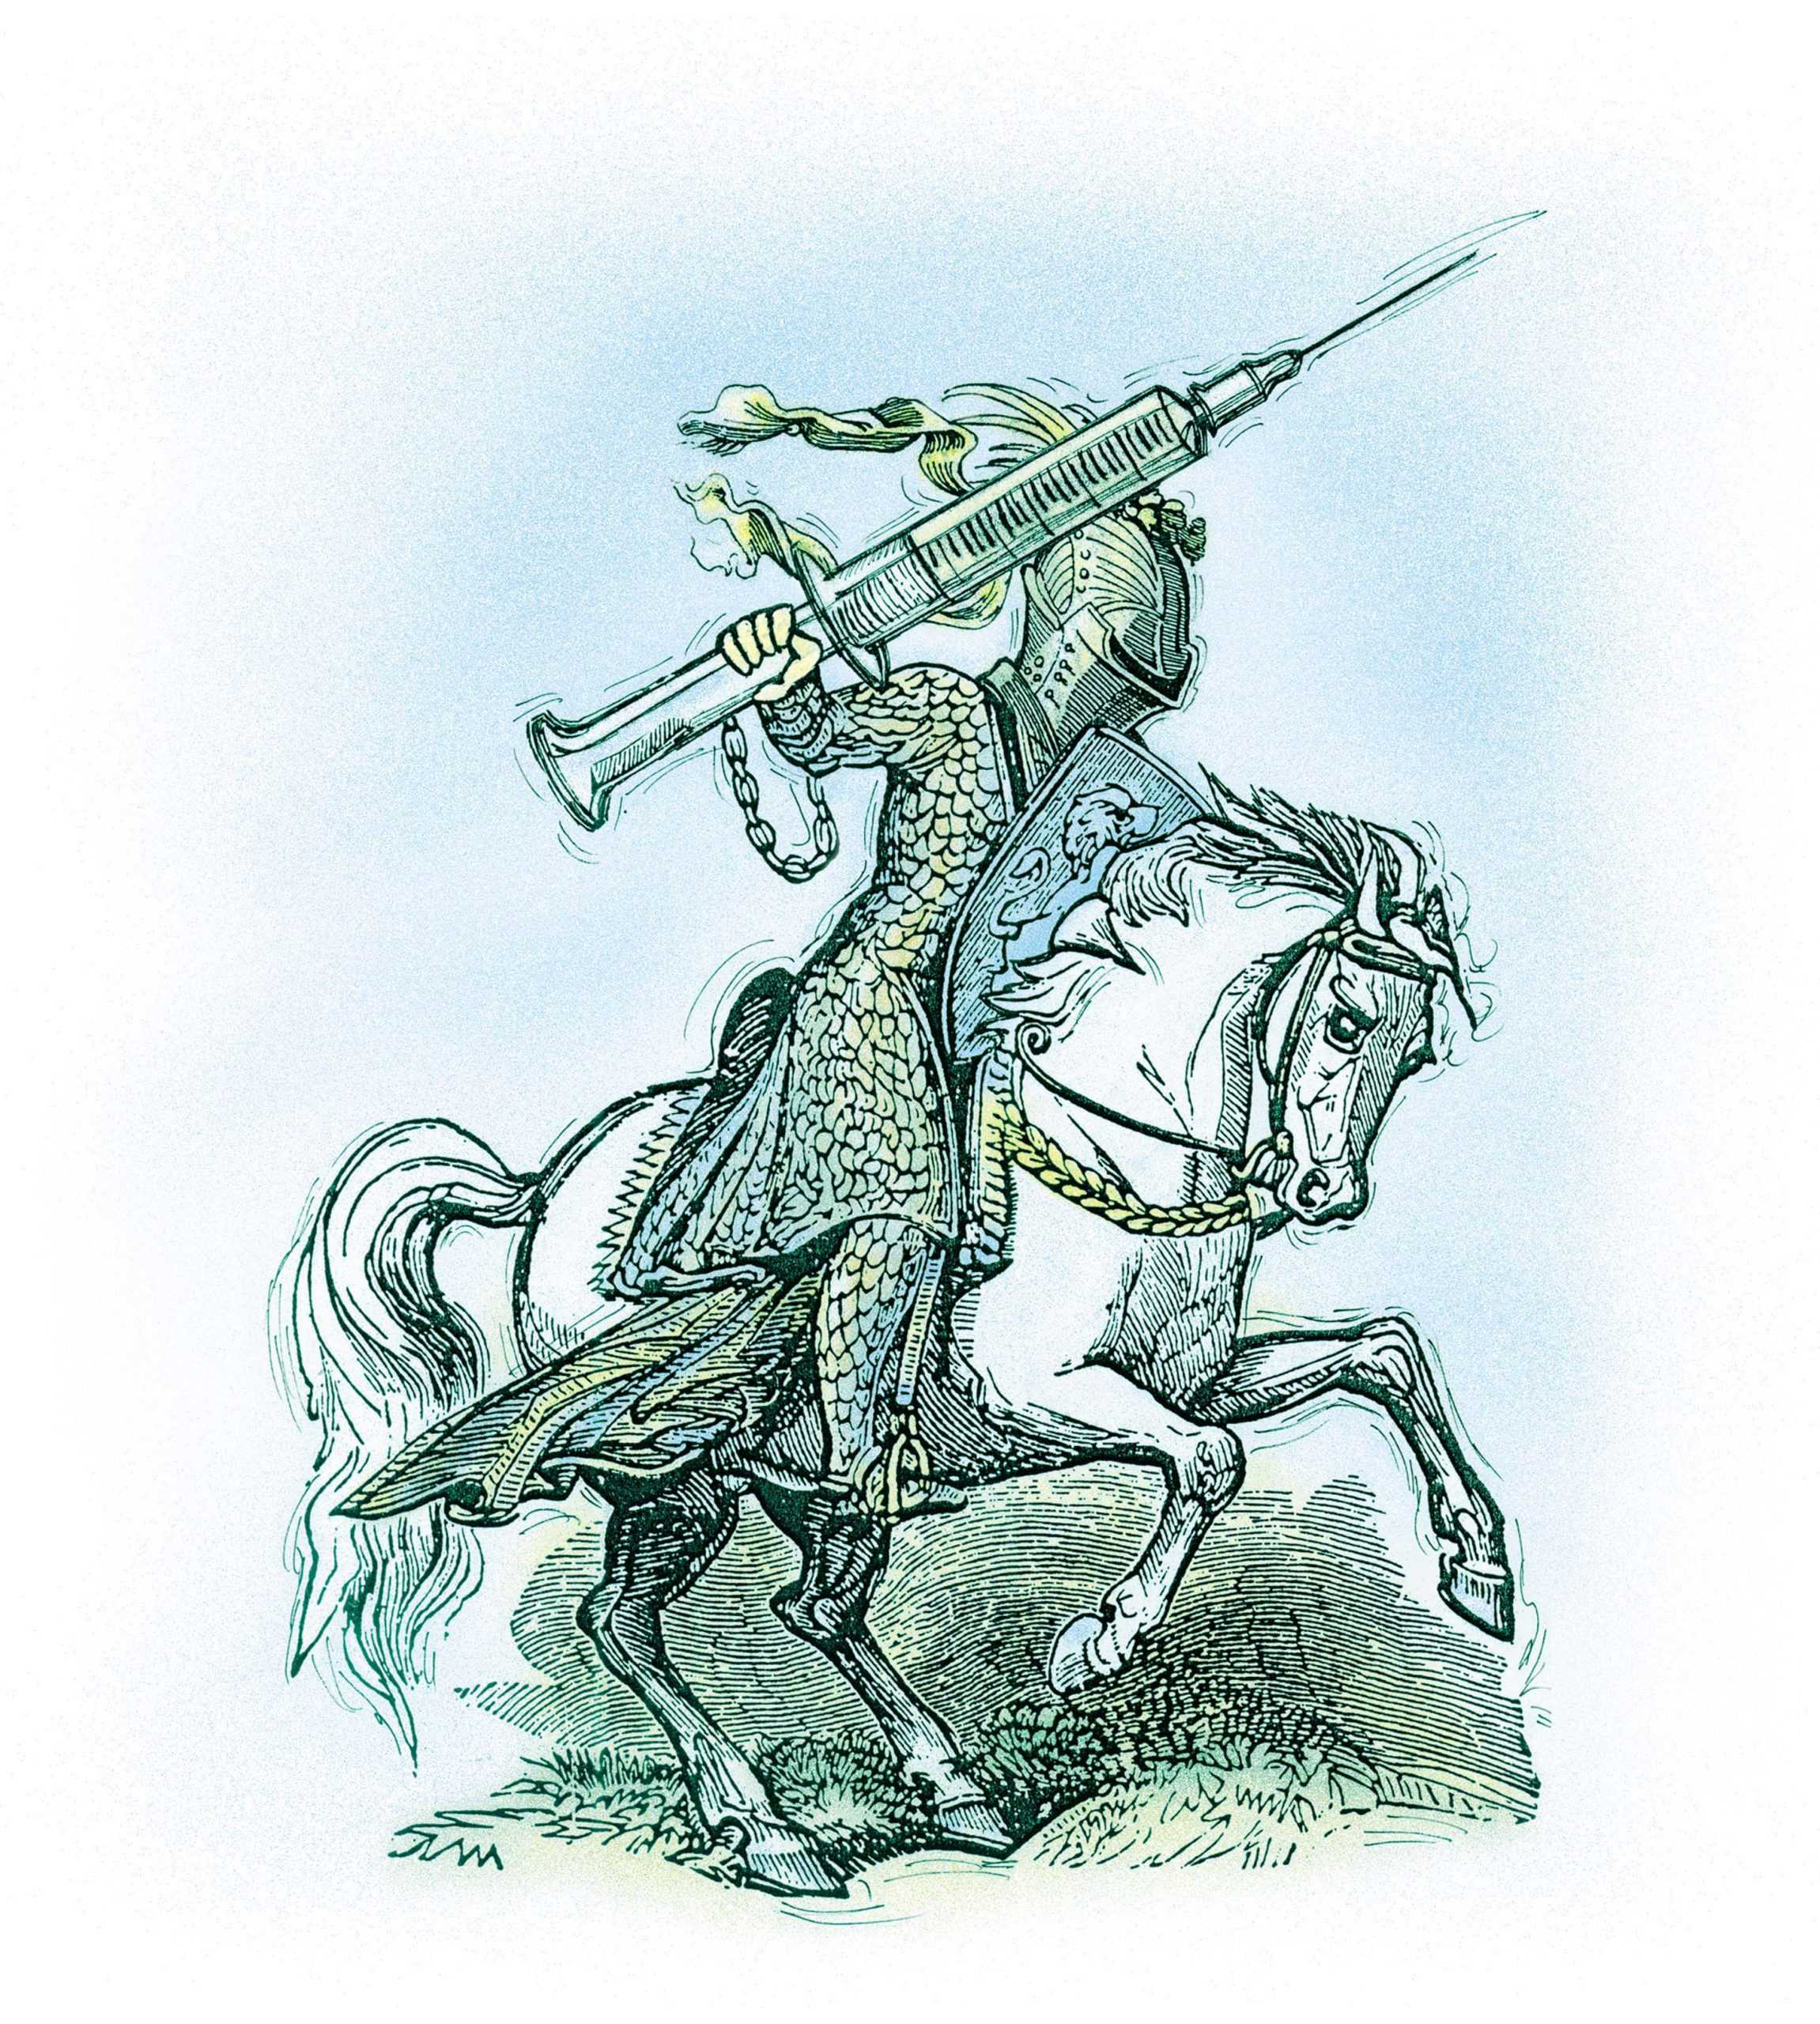 200 dpi 5 col x 10.75 in / 246x273 mm / 837x929 pixels Julie Notarianni color illustration of a knight riding a stallion with a large flu shot syringe. The Seattle Times 1999 

With FLU, The Seattle Times by Judith Blake